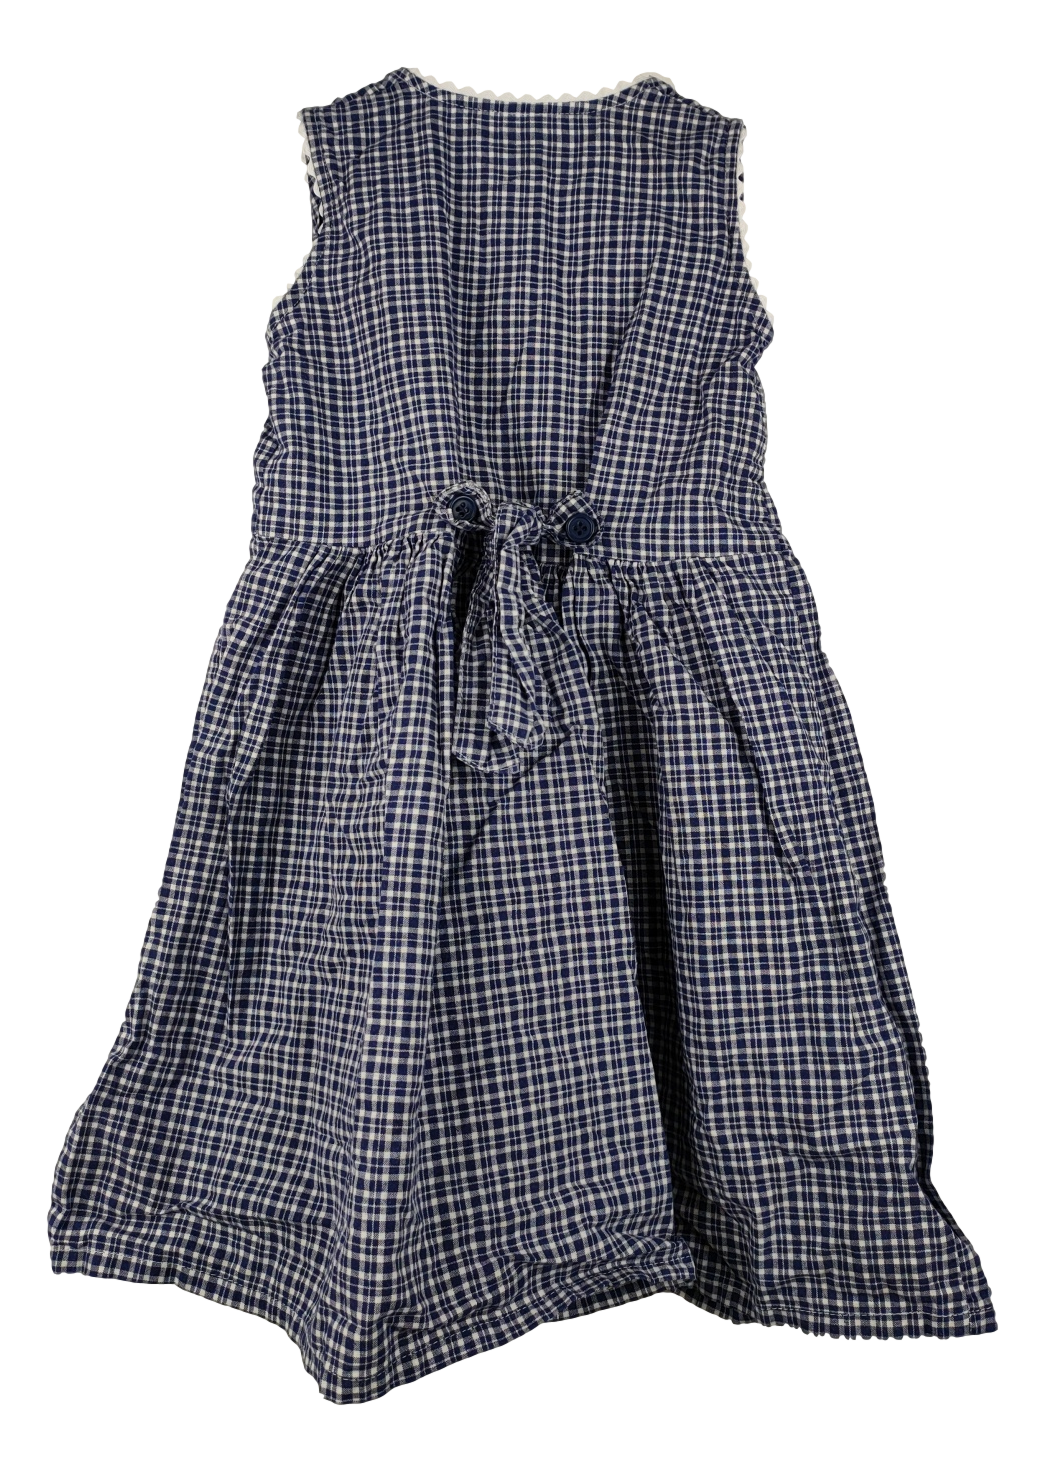 rOBE SANS MARQUE -TAILLE 2 ANS